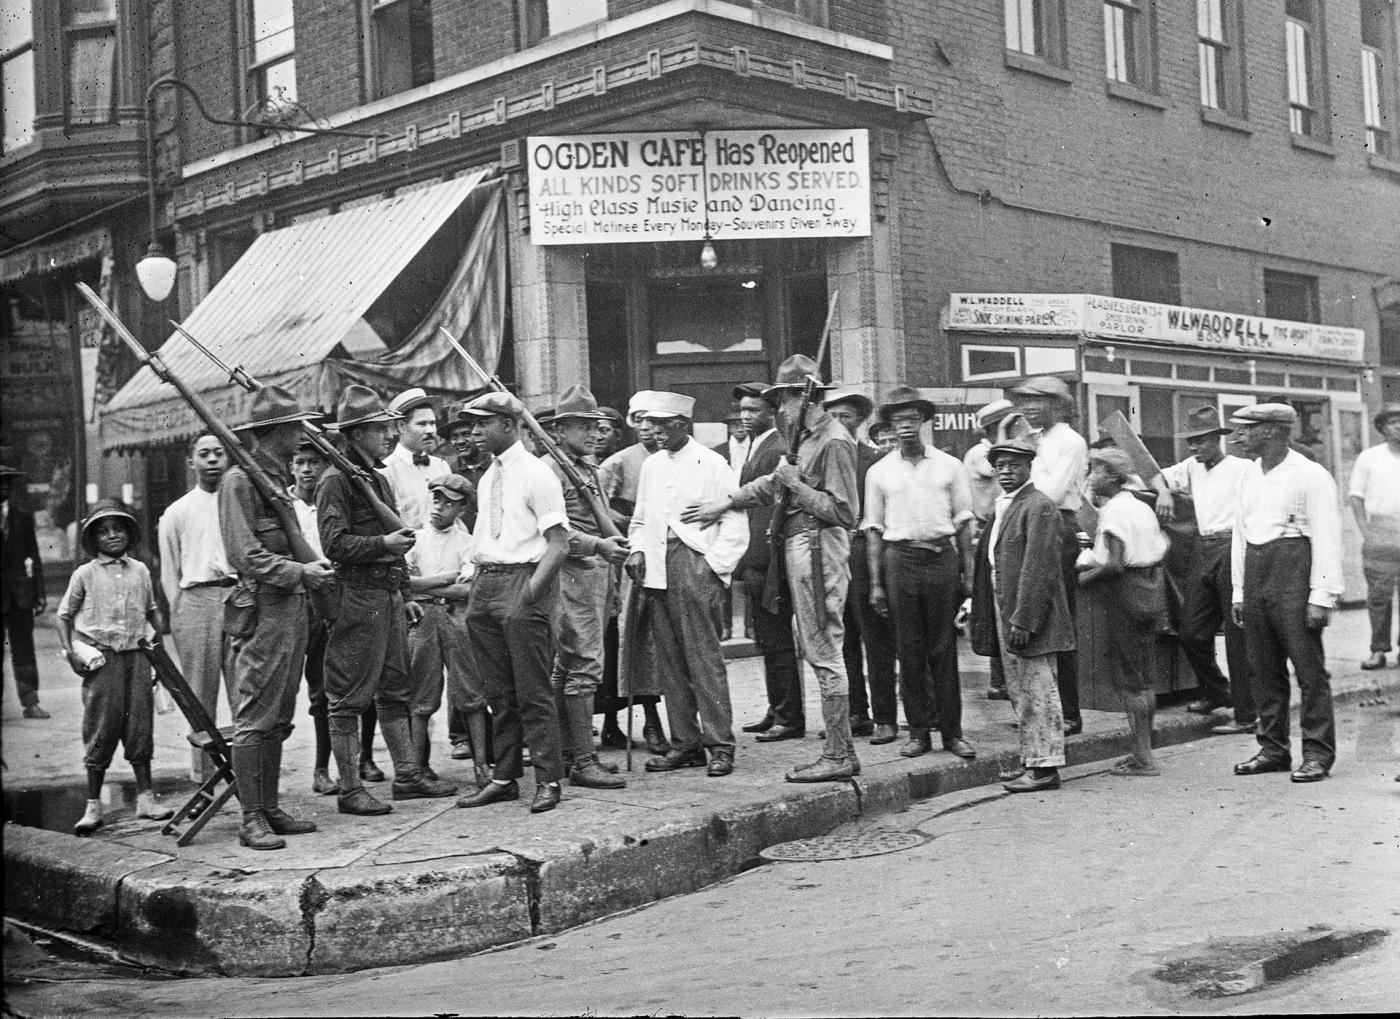 A crowd of men and armed National Guard stand in front of the Ogden Cafe during the 1919 race riot in Chicago.Photo: Chicago History Museum / The Jun Fujita negatives collection